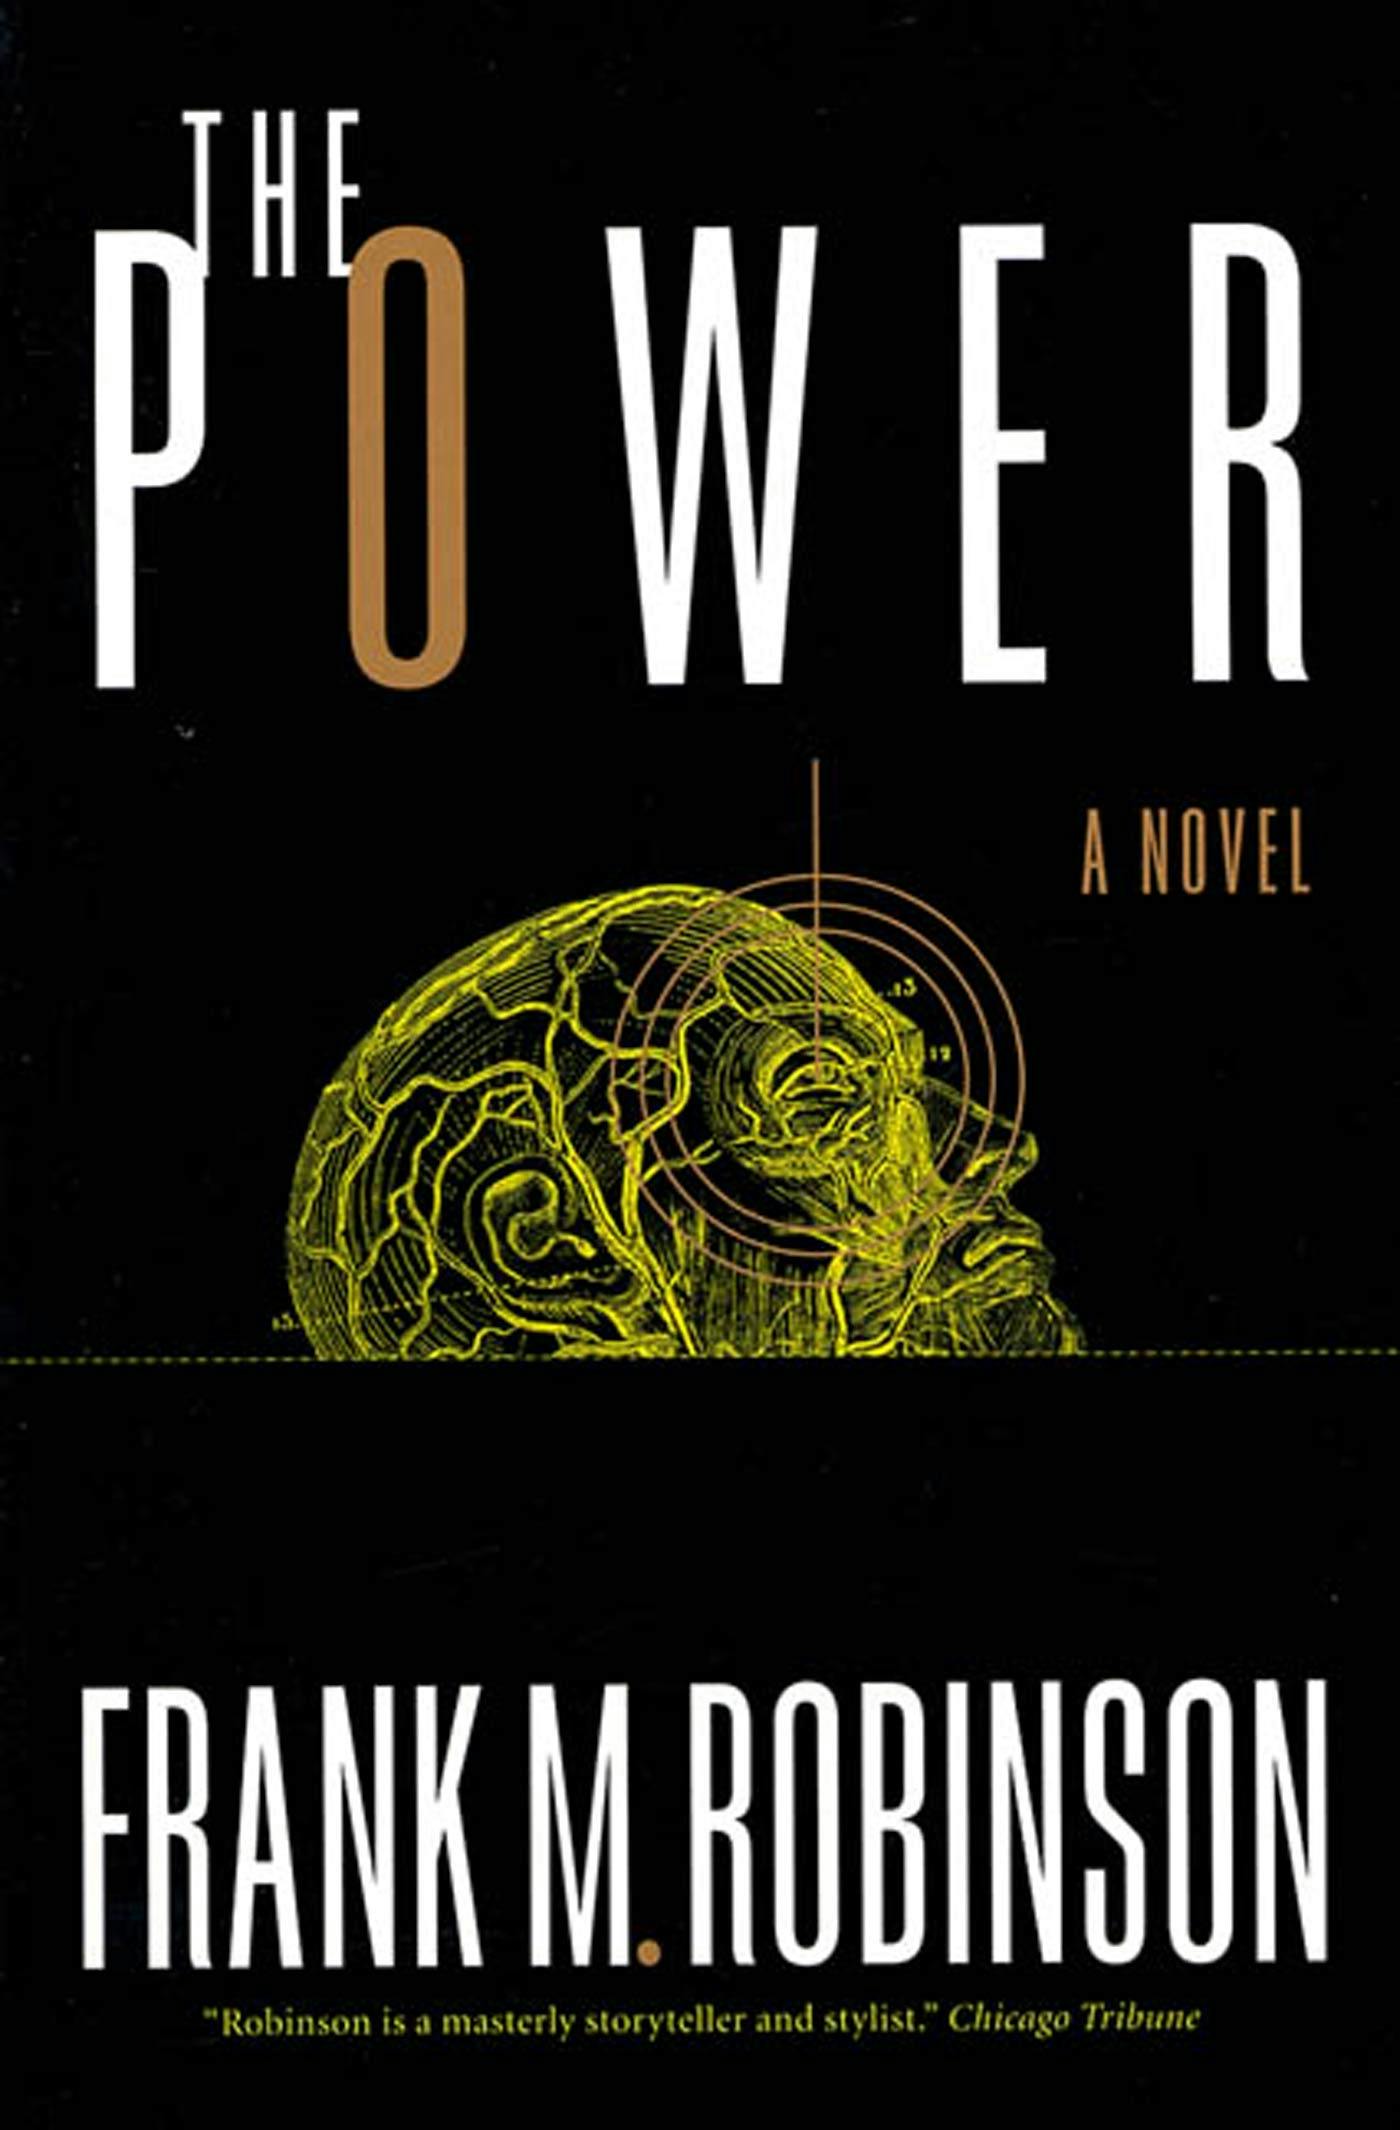 Cover for the book titled as: The Power